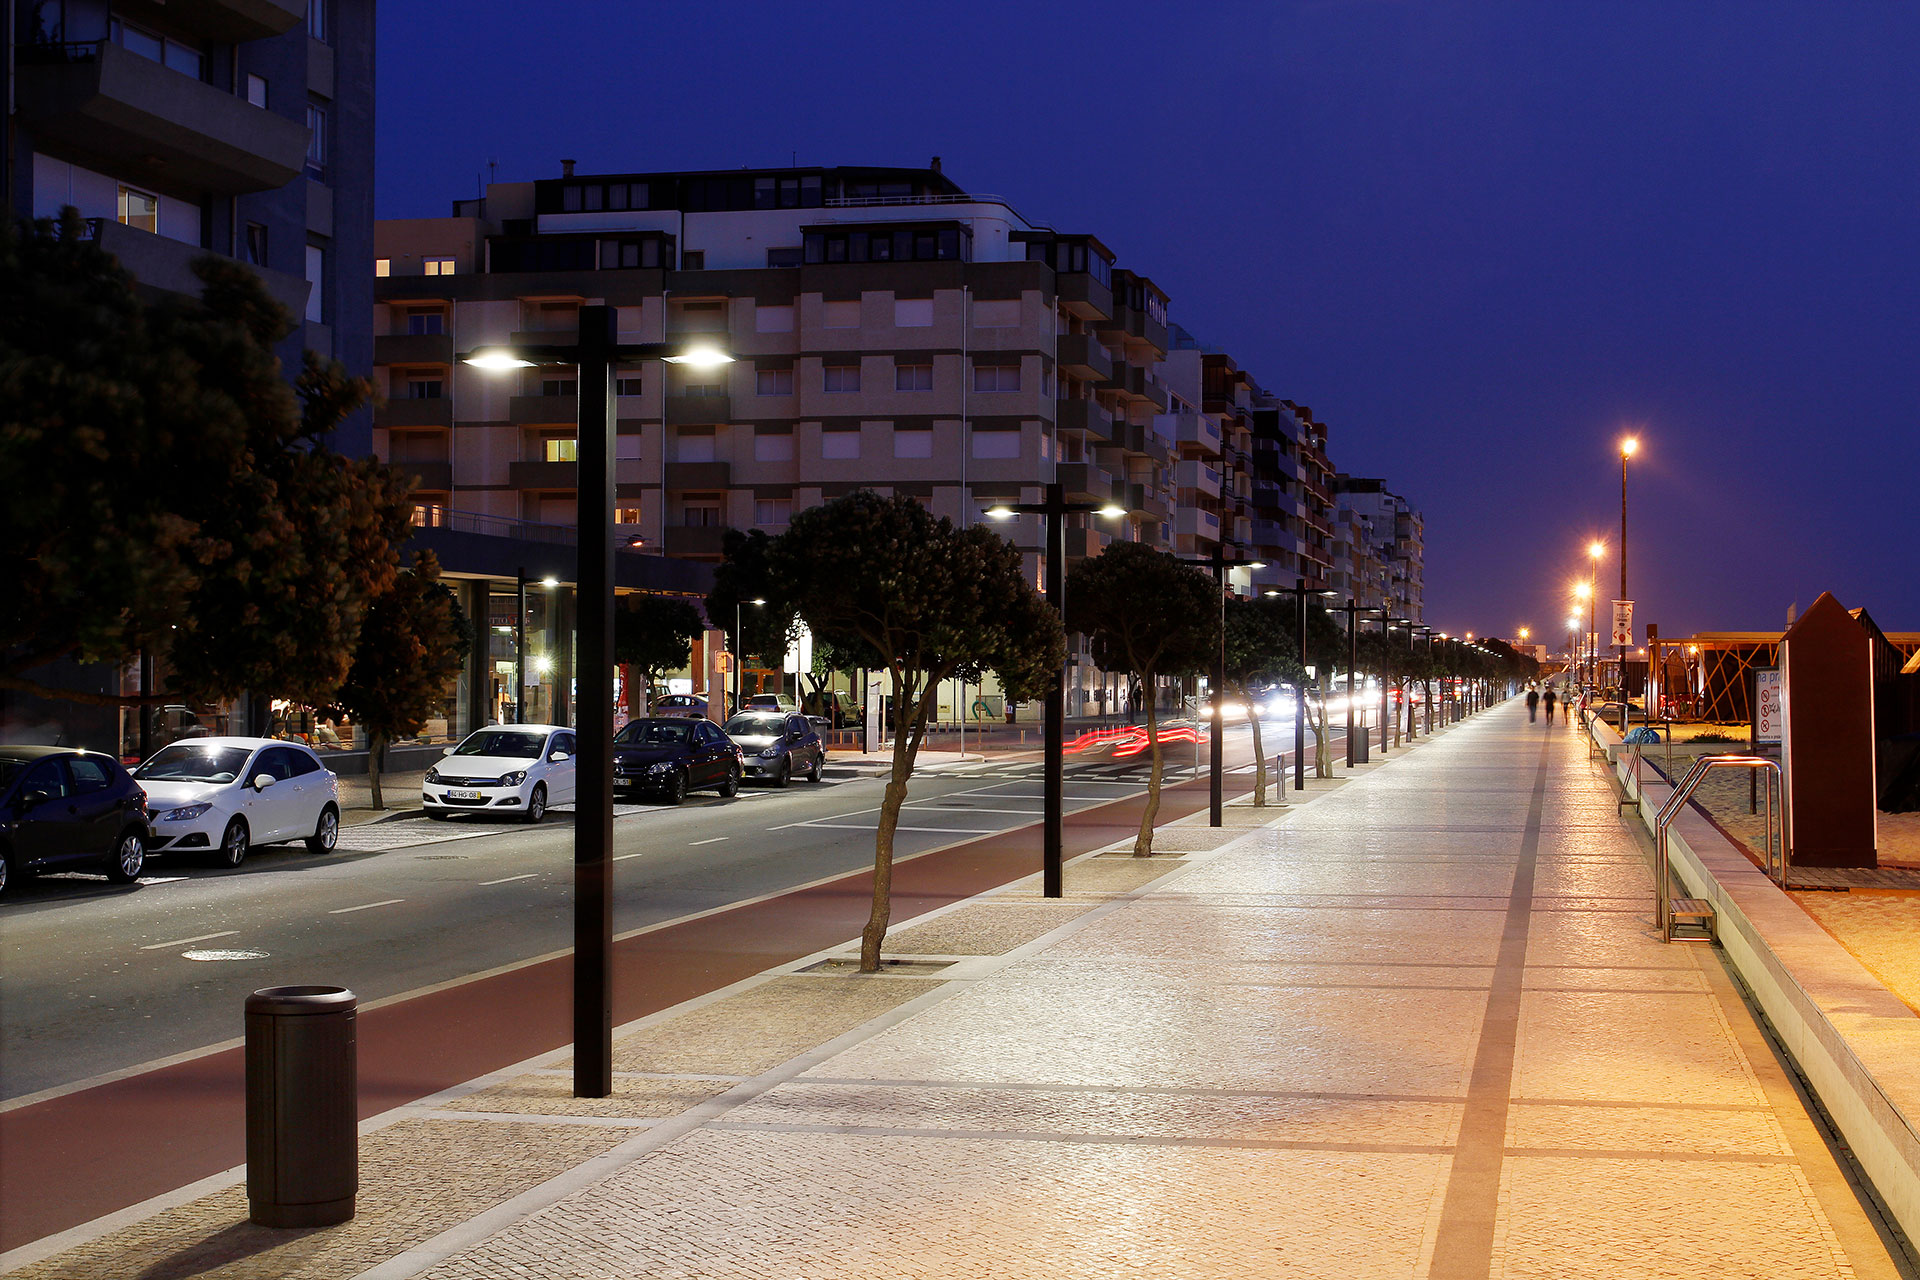 The Piano lights this bike path in Povoa de Varzim Portugal to ensure comfort and safety for cyclists